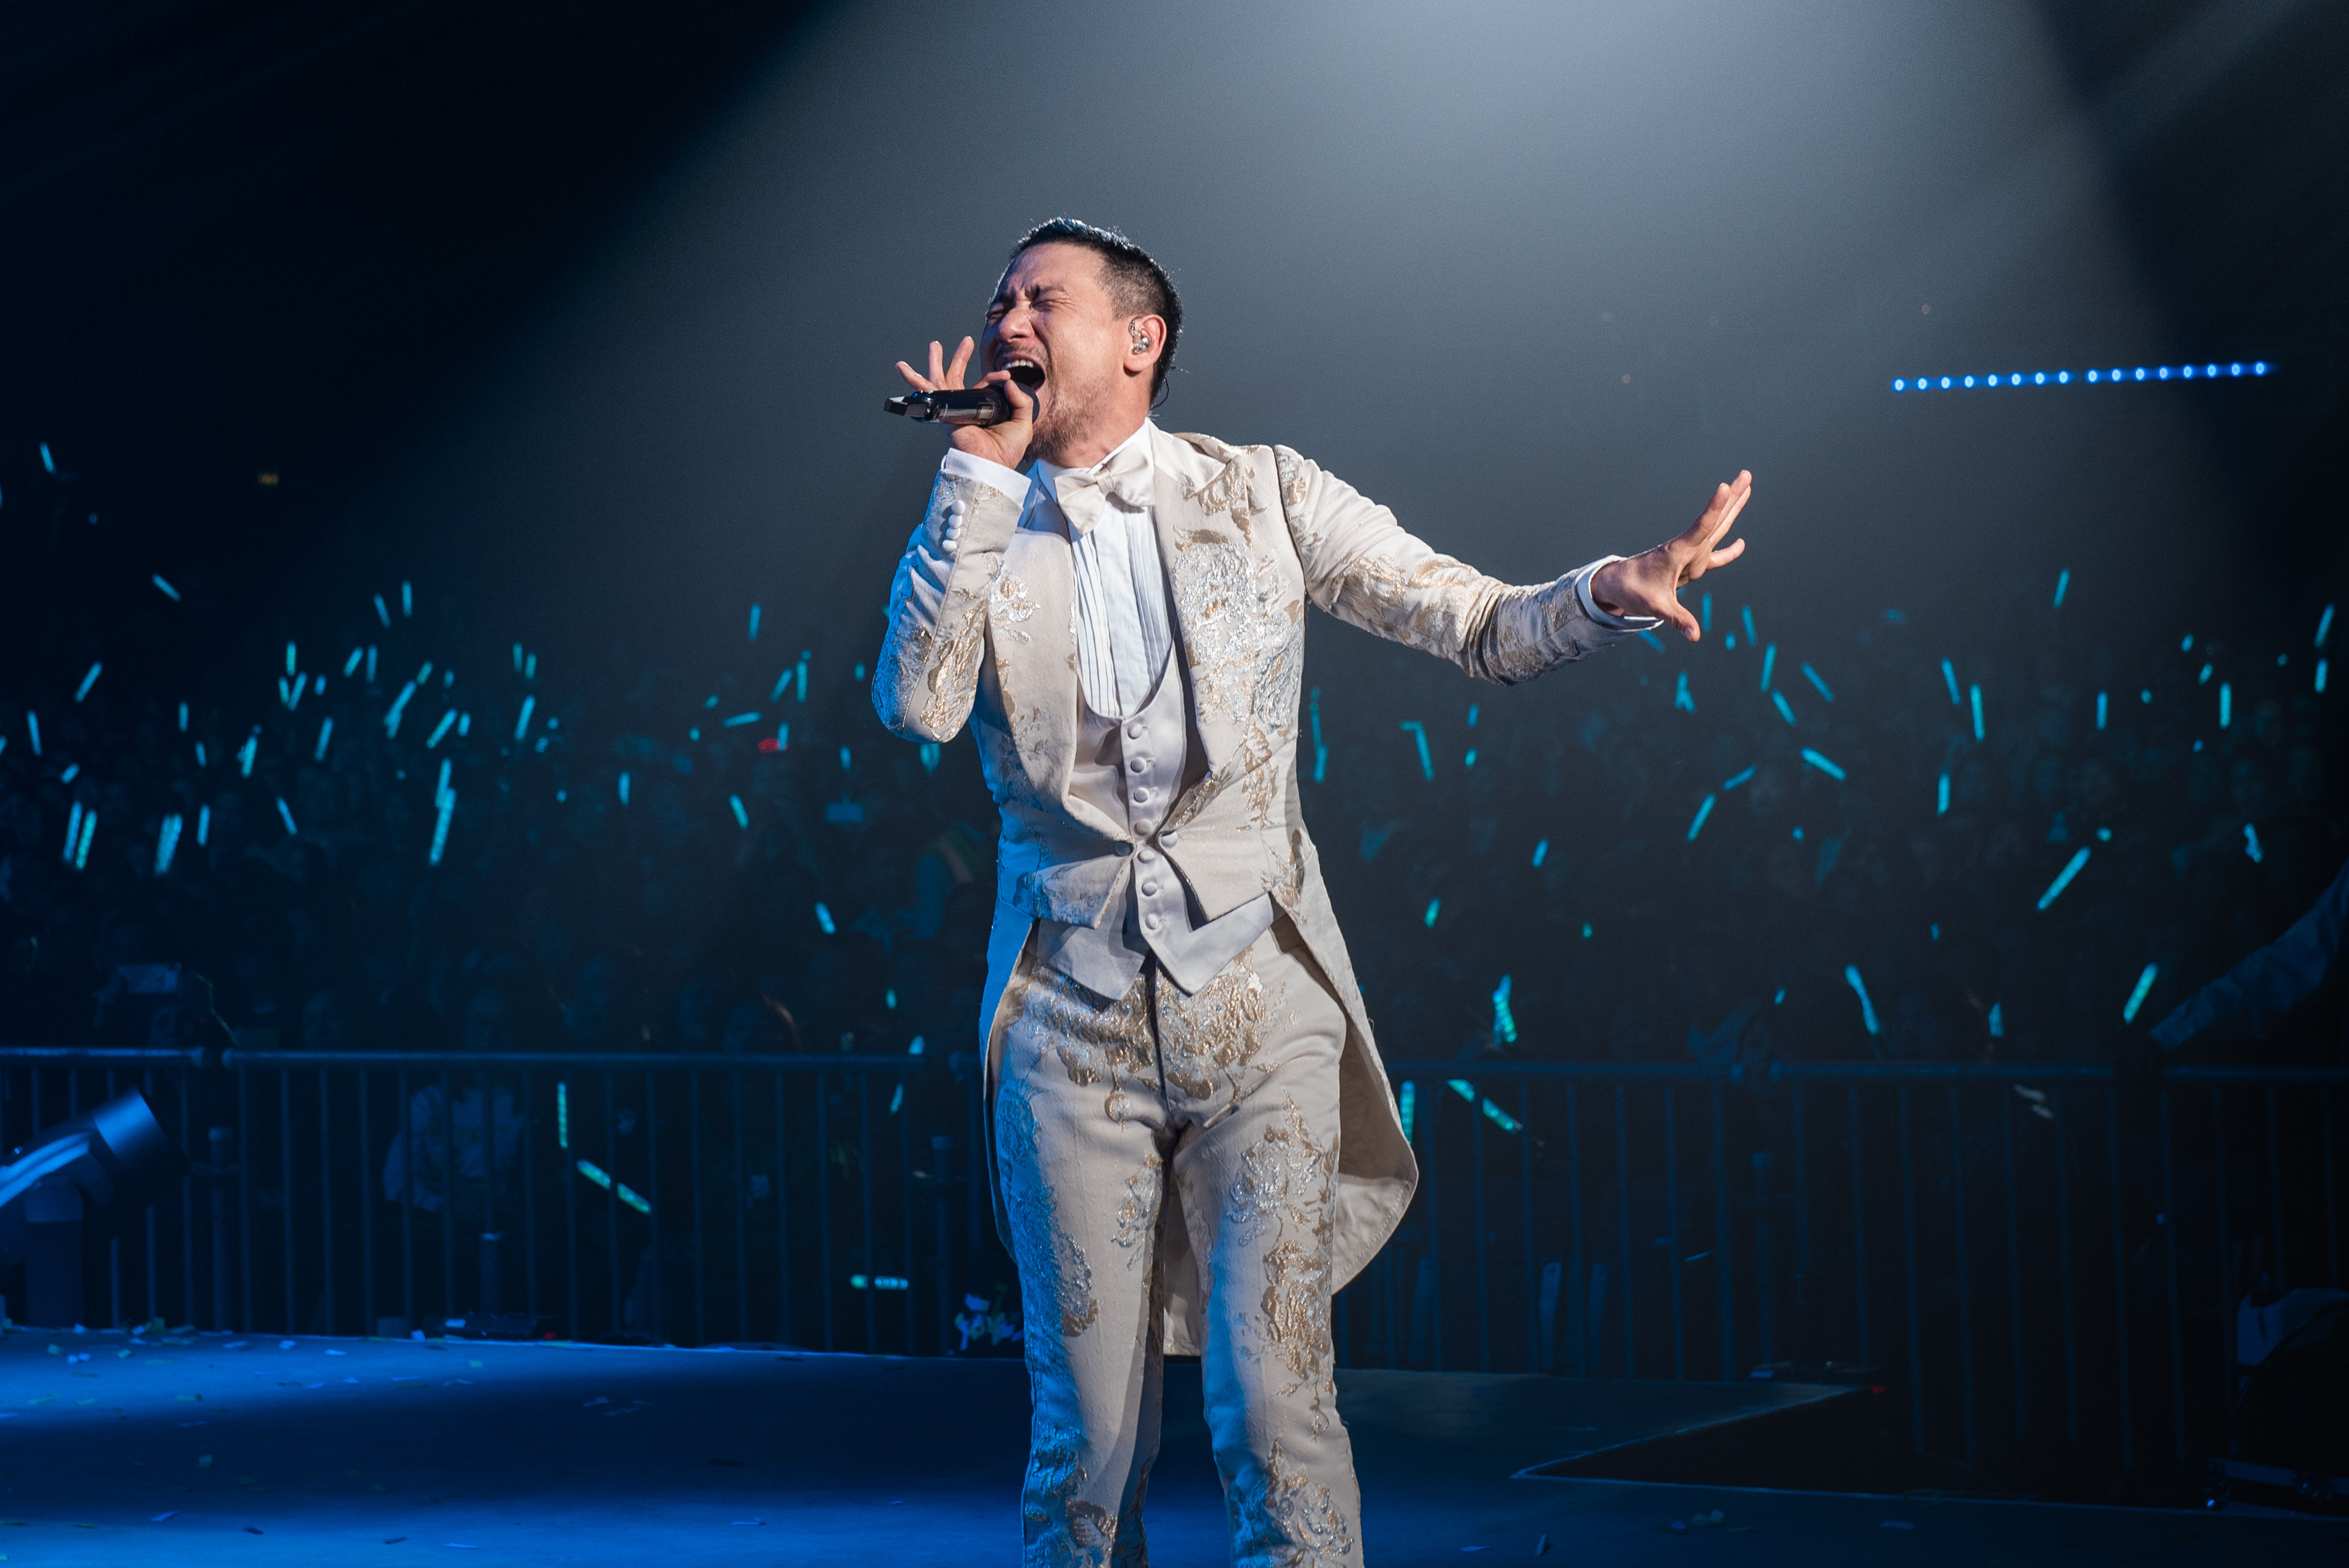 Jacky Cheung Hok-yau on stage  at Wembley Arena in 2018 in London, England,during his “Classic Tour”. As Cheung turns 62, we take a look back at the singer and actor’s career highlights. Photo: Getty Images